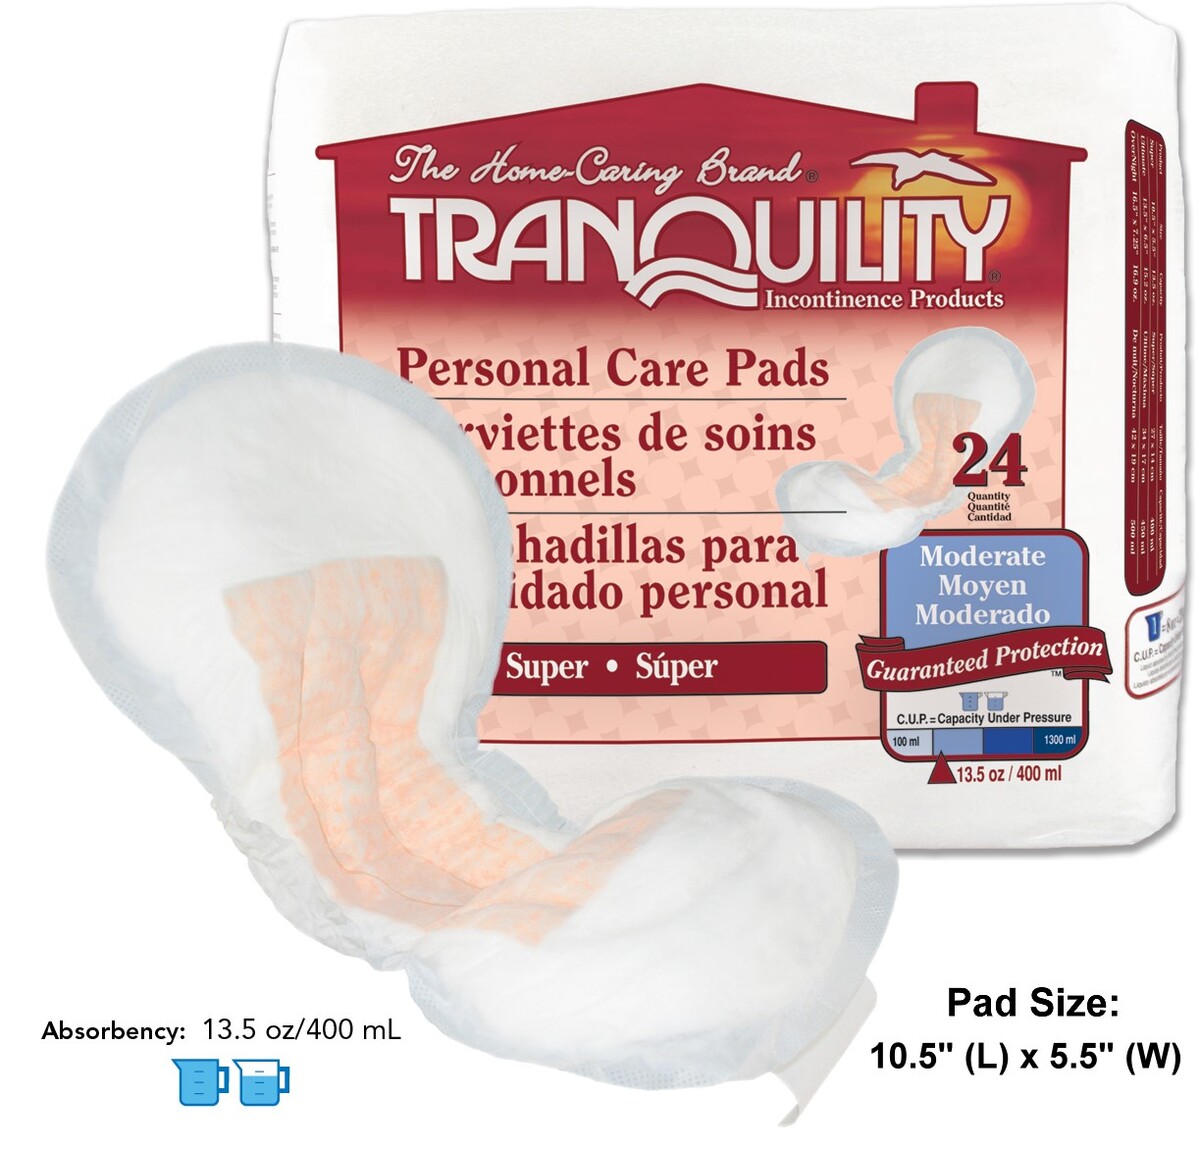 Tranquility Light to Moderate Bladder Control Pads